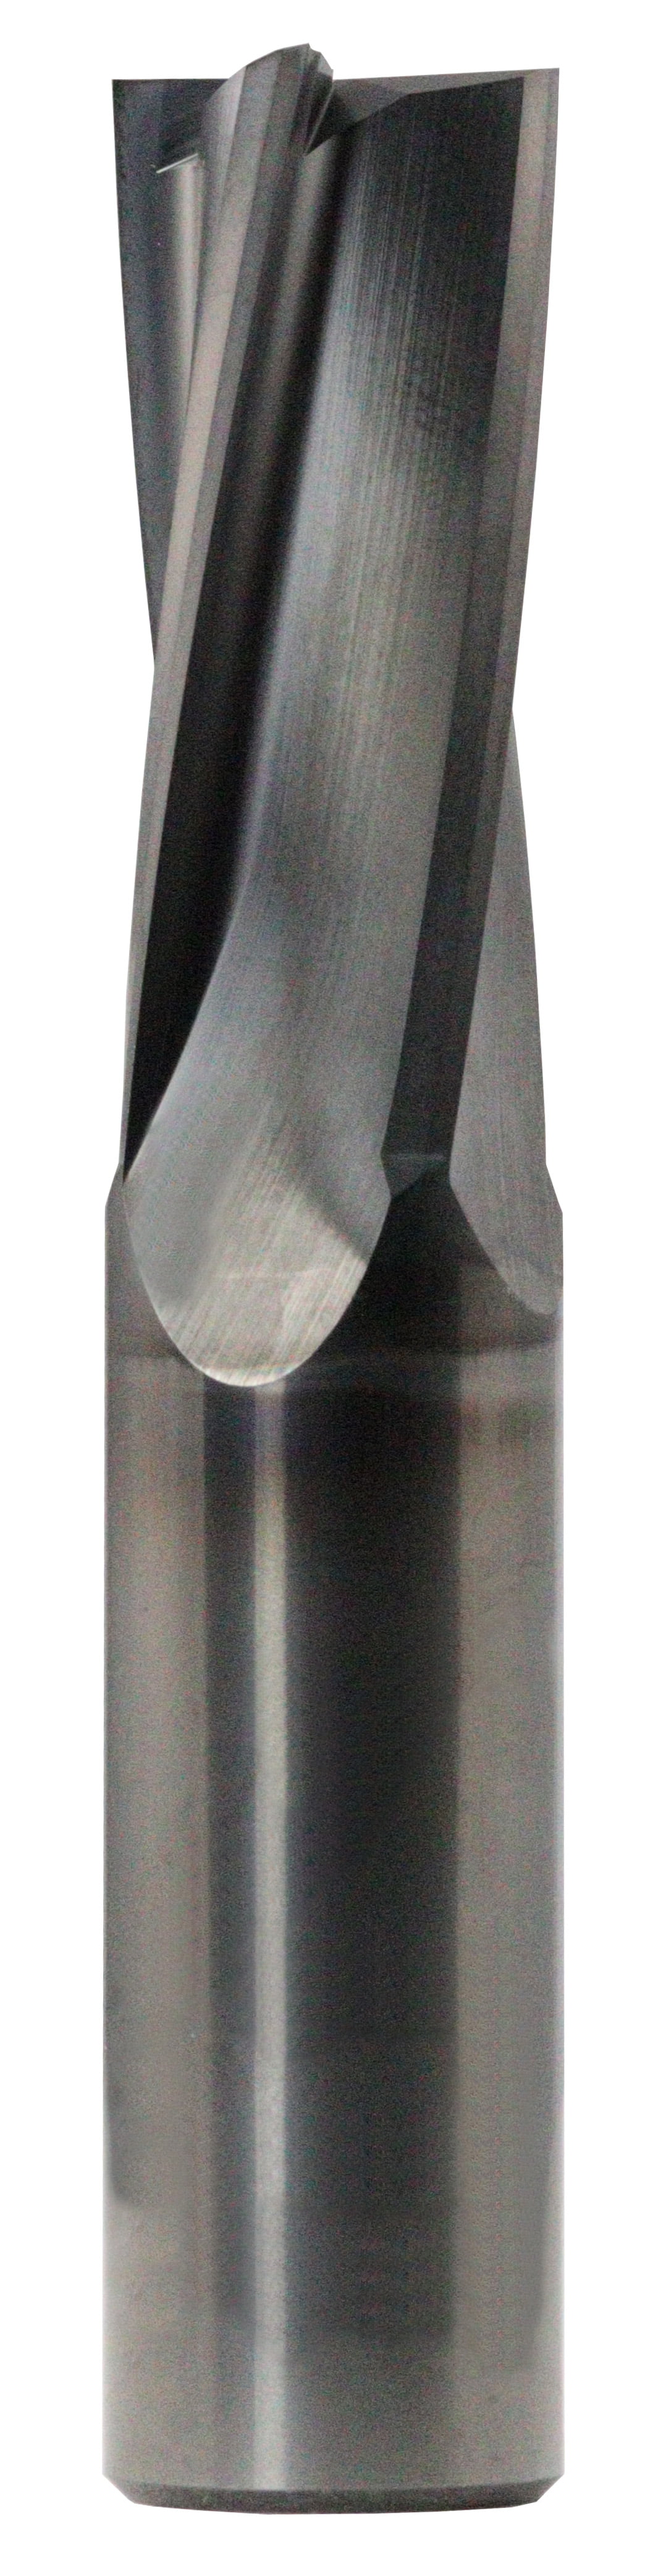 12.00mm Dia, 4 Flute, Square End End Mill - 83062